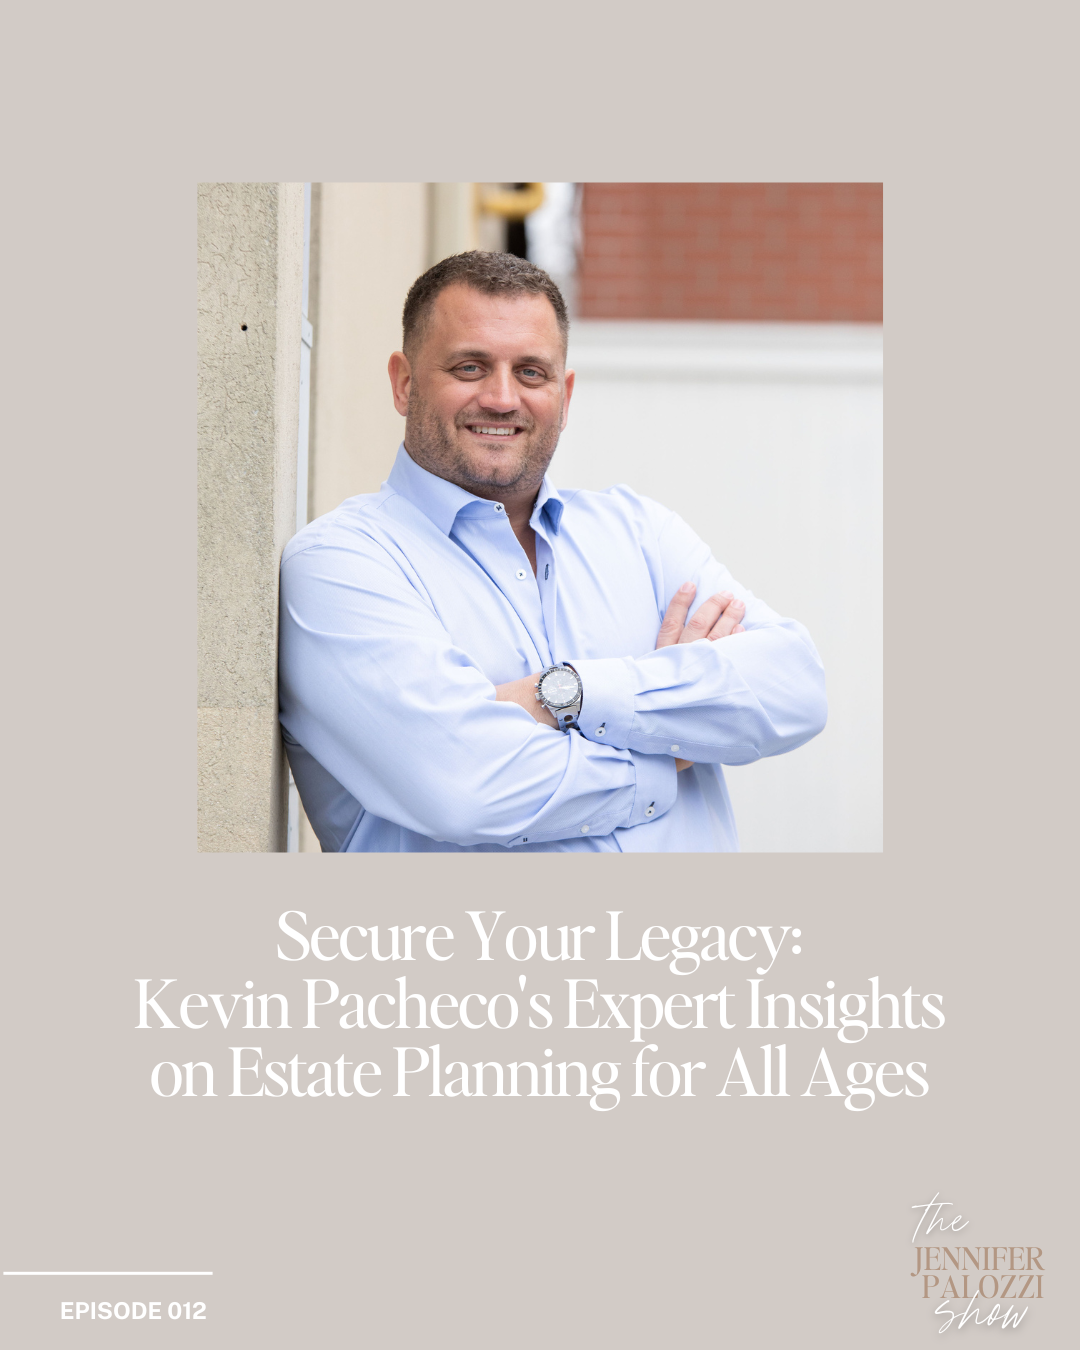 Episode 012 - Secure Your Legacy: Kevin Pacheco's Expert Insights on Estate Planning for All Ages